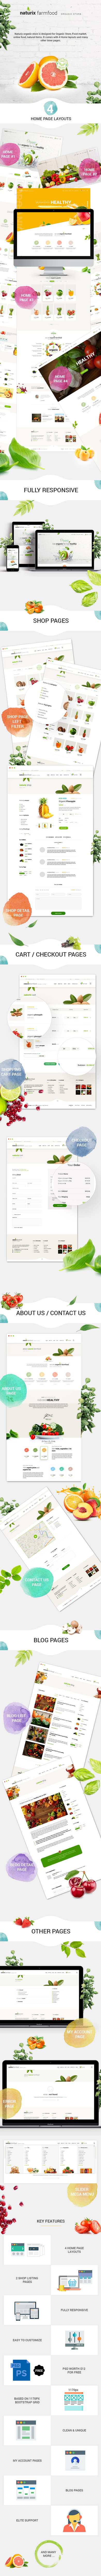 Naturix - Organic Fruit Vegetables Store HTML Template with RTL - 4